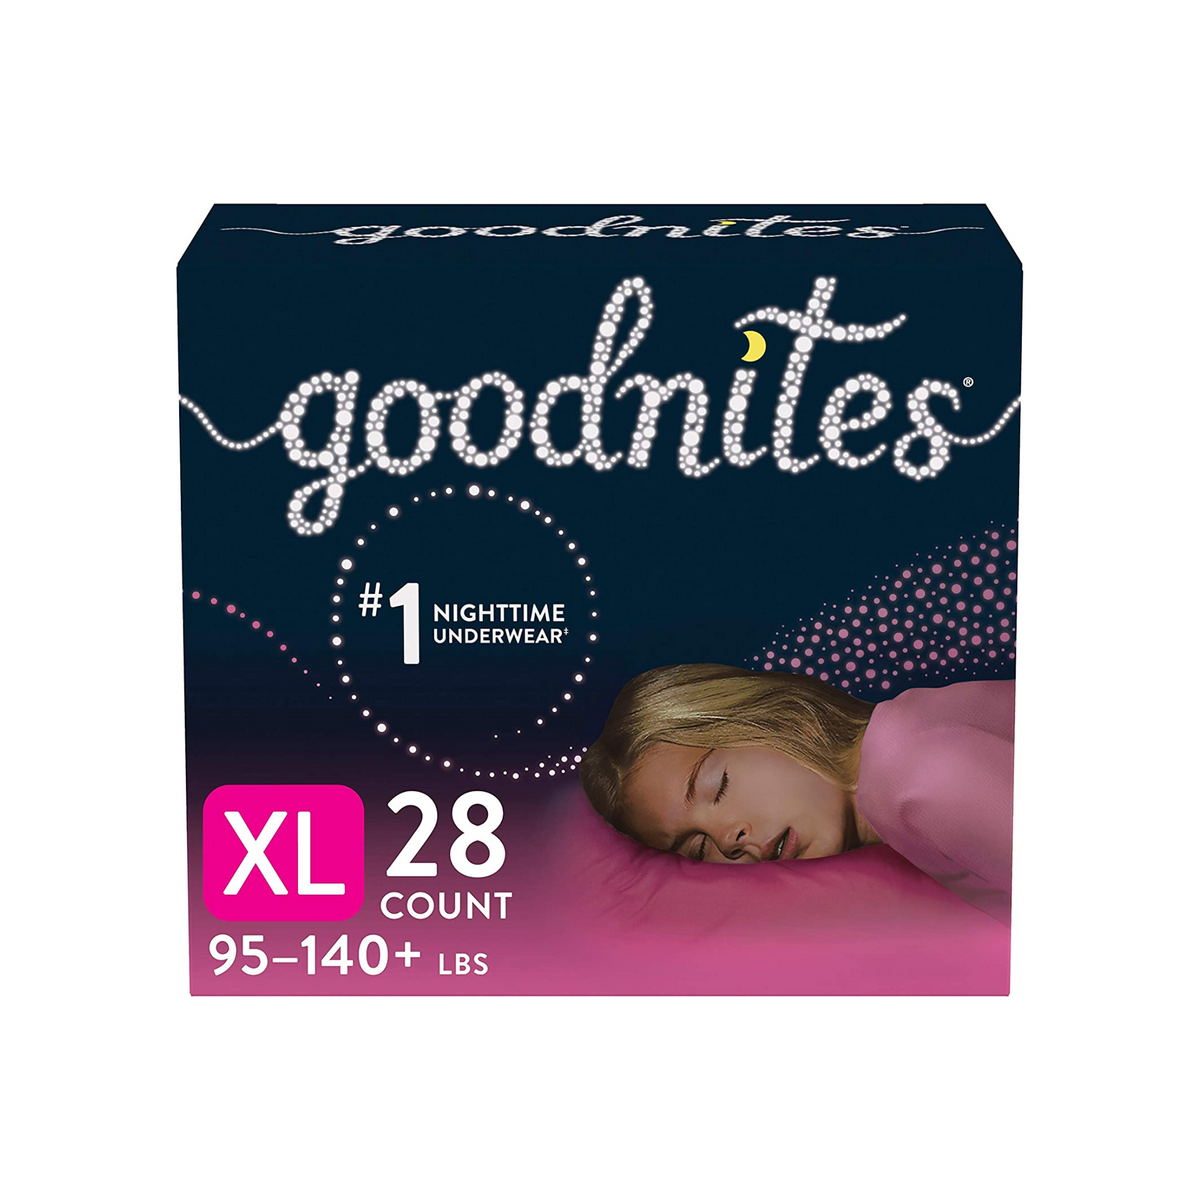 Goodnites Nighttime Bedwetting Underwear For Girls, X-Large, 28 Ct